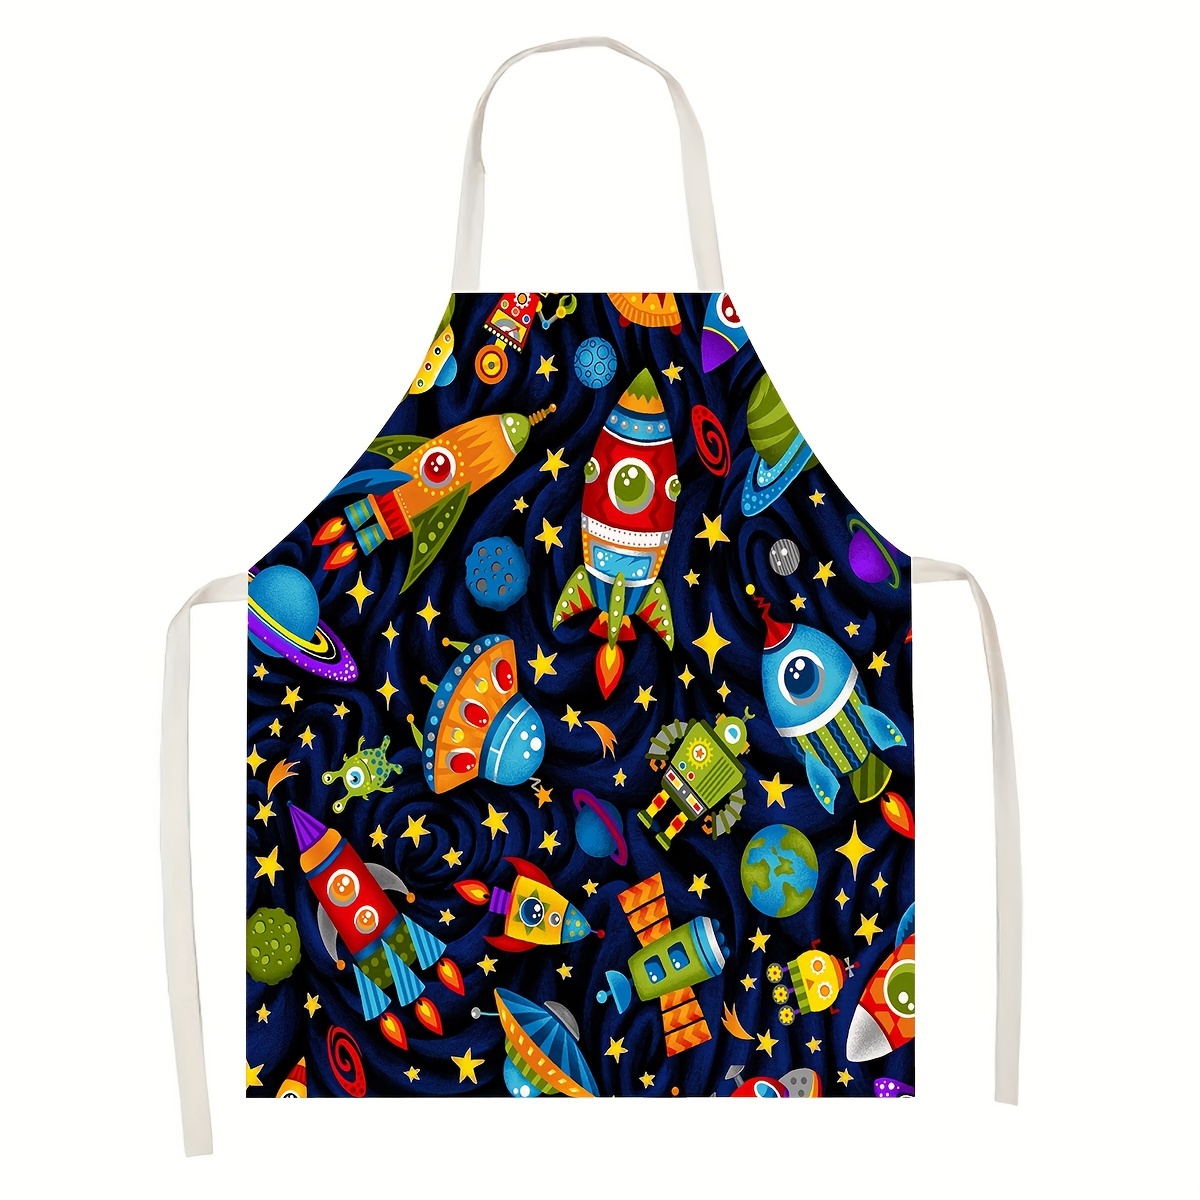 

1pc, Kitchen Apron, Cartoon Style Rocket Dinosaur Planet Apron, Polyester Stain-resistant Sleeveless Apron, Unisex Cooking Workwear, Suitable For Painting, Arts